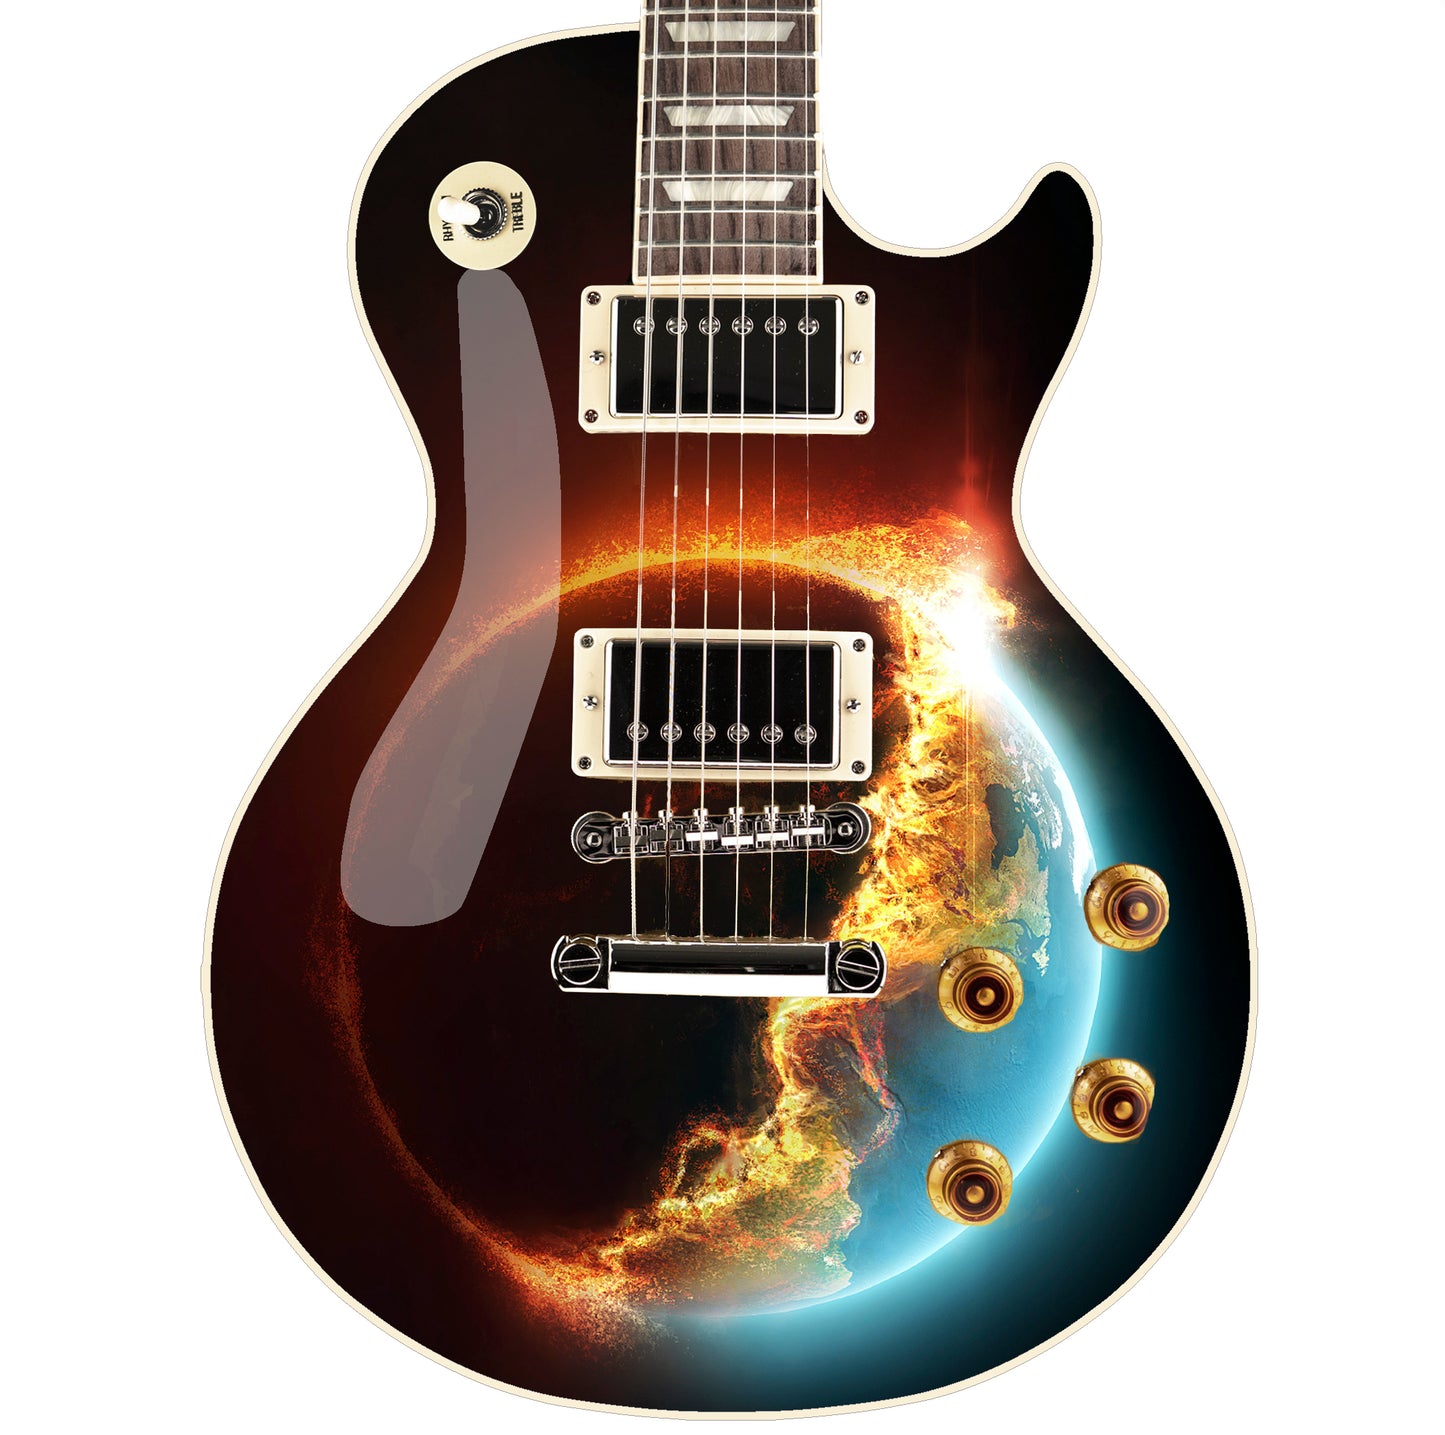 Guitar, Bass or Acoustic Skin Wrap Laminated Vinyl Decal Sticker World on Fire GS66